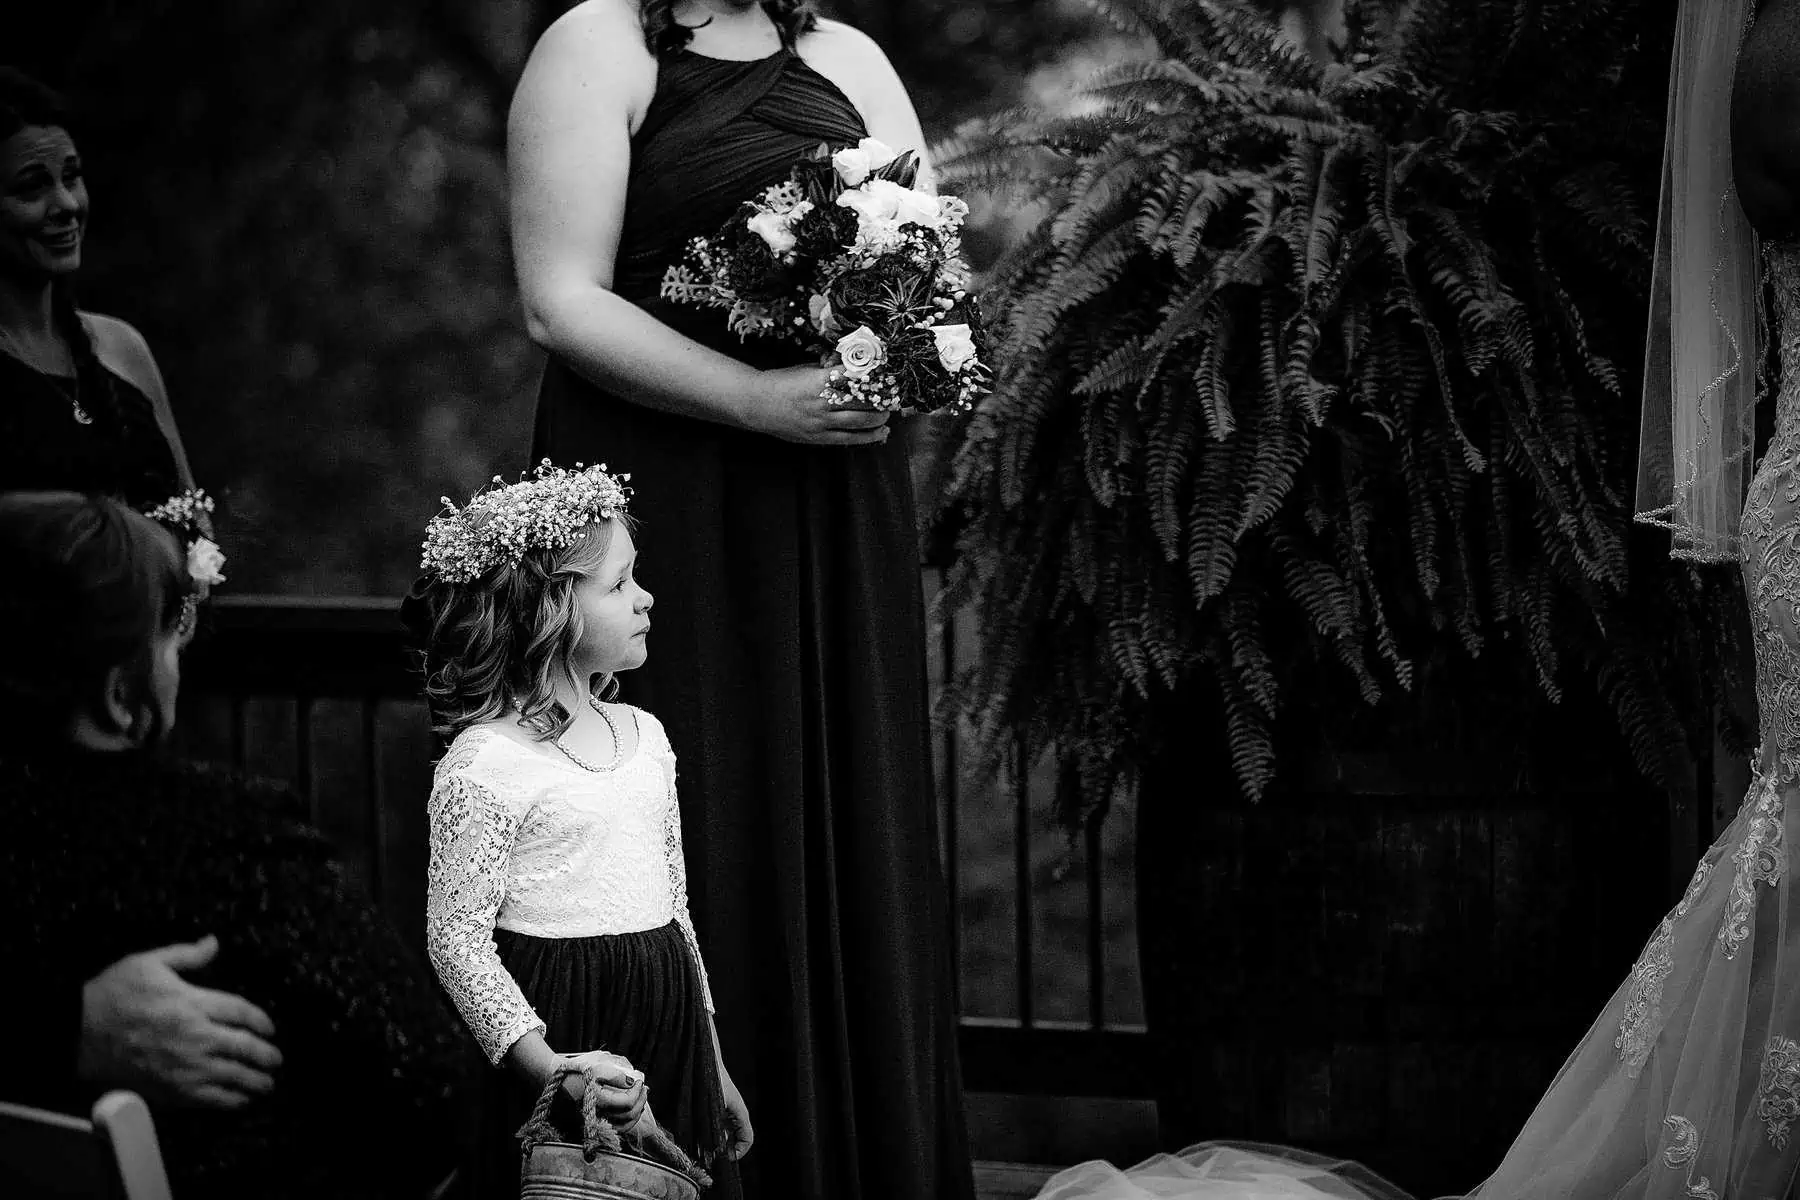 Black and white photo of a little girl at a wedding ceremony.